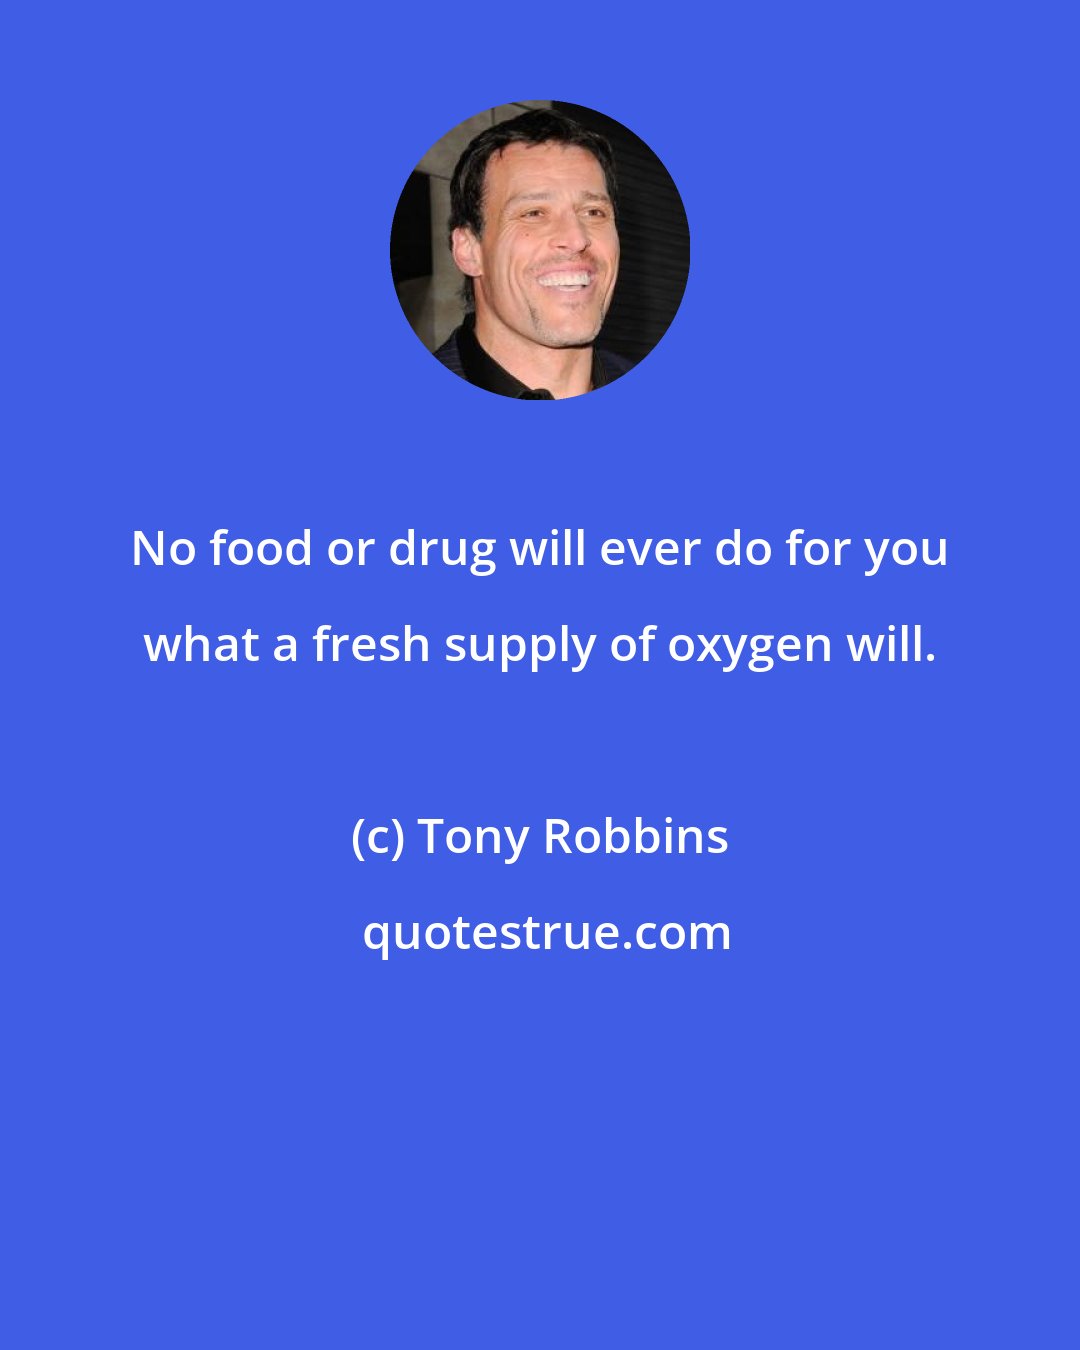 Tony Robbins: No food or drug will ever do for you what a fresh supply of oxygen will.